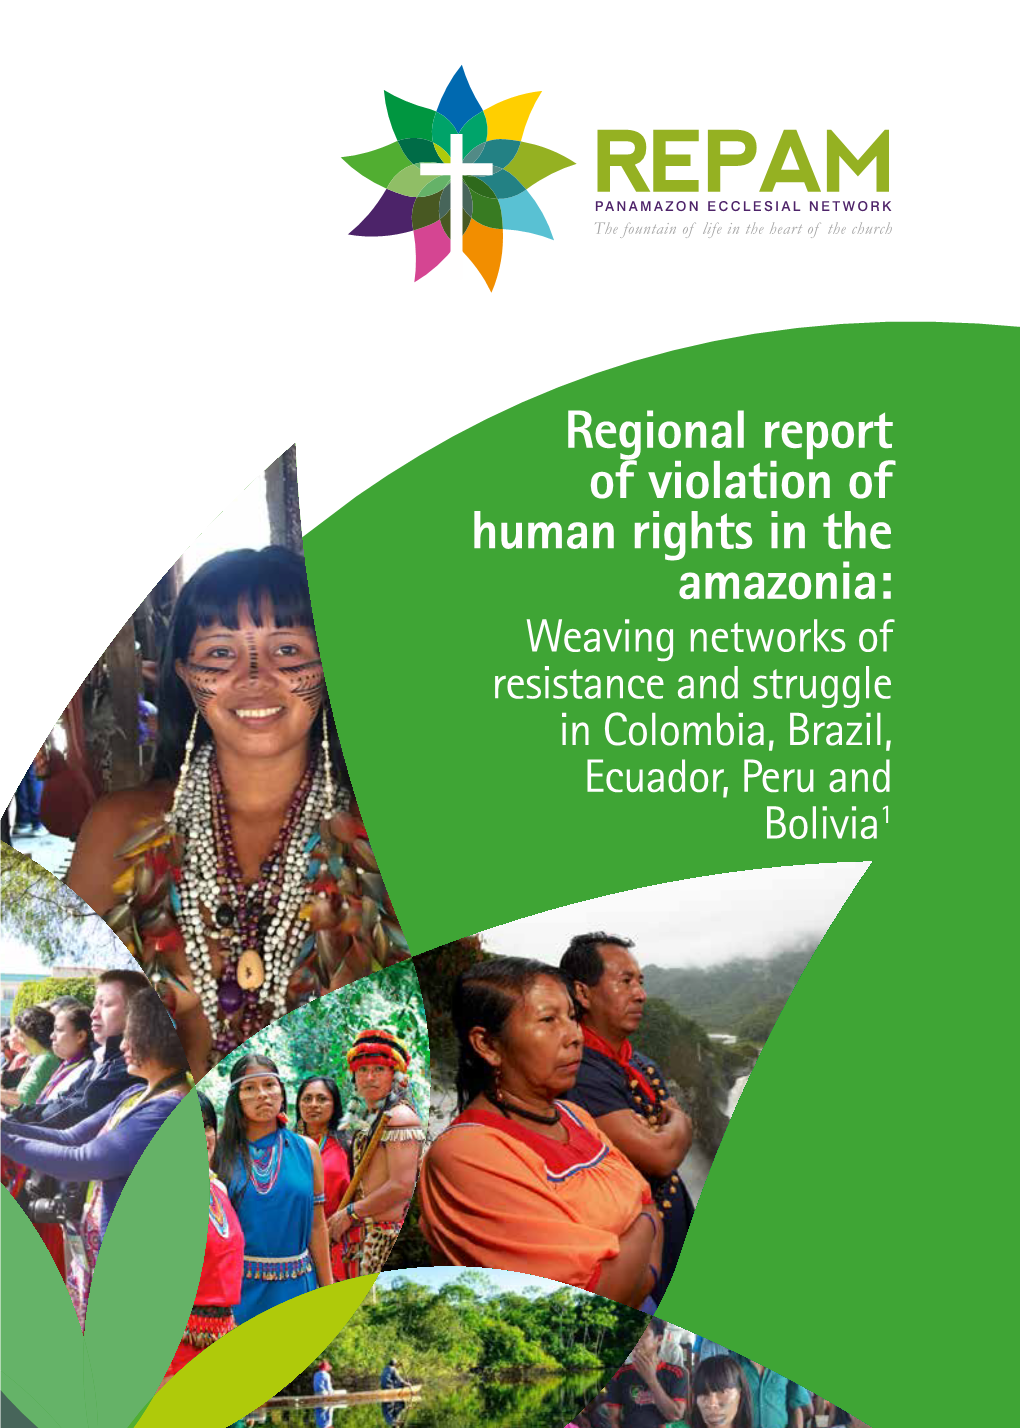 Regional Report of Violation of Human Rights in the Amazonia: Weaving Networks of Resistance and Struggle in Colombia, Brazil, Ecuador, Peru and Bolivia1